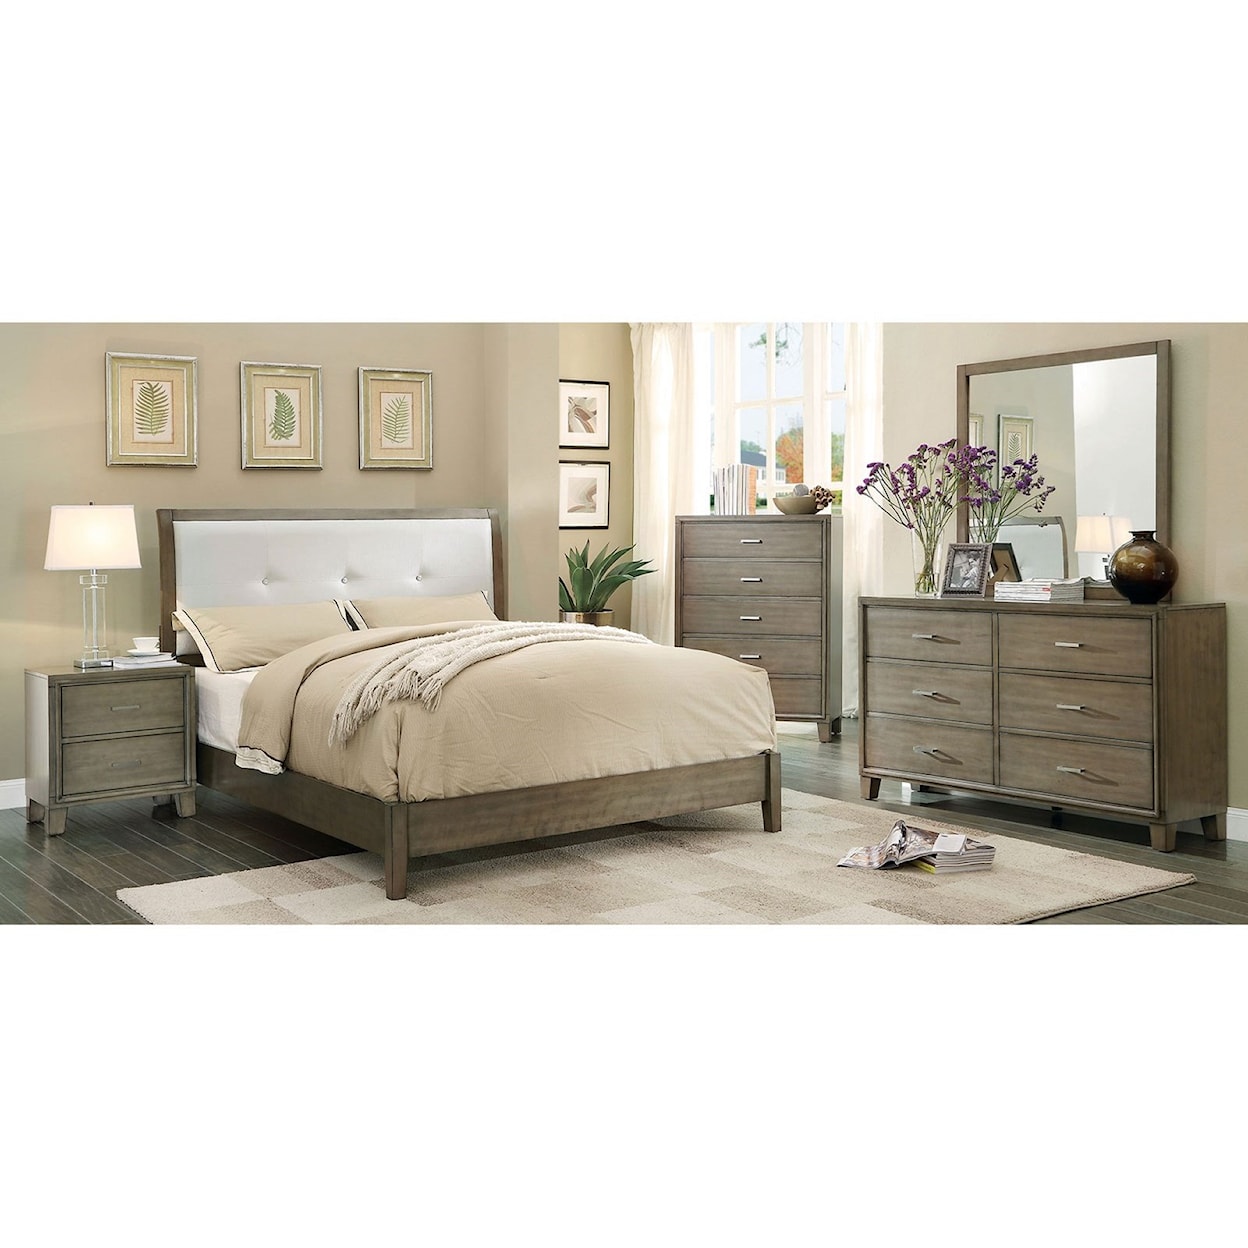 Furniture of America Enrico I Queen Bedroom Group